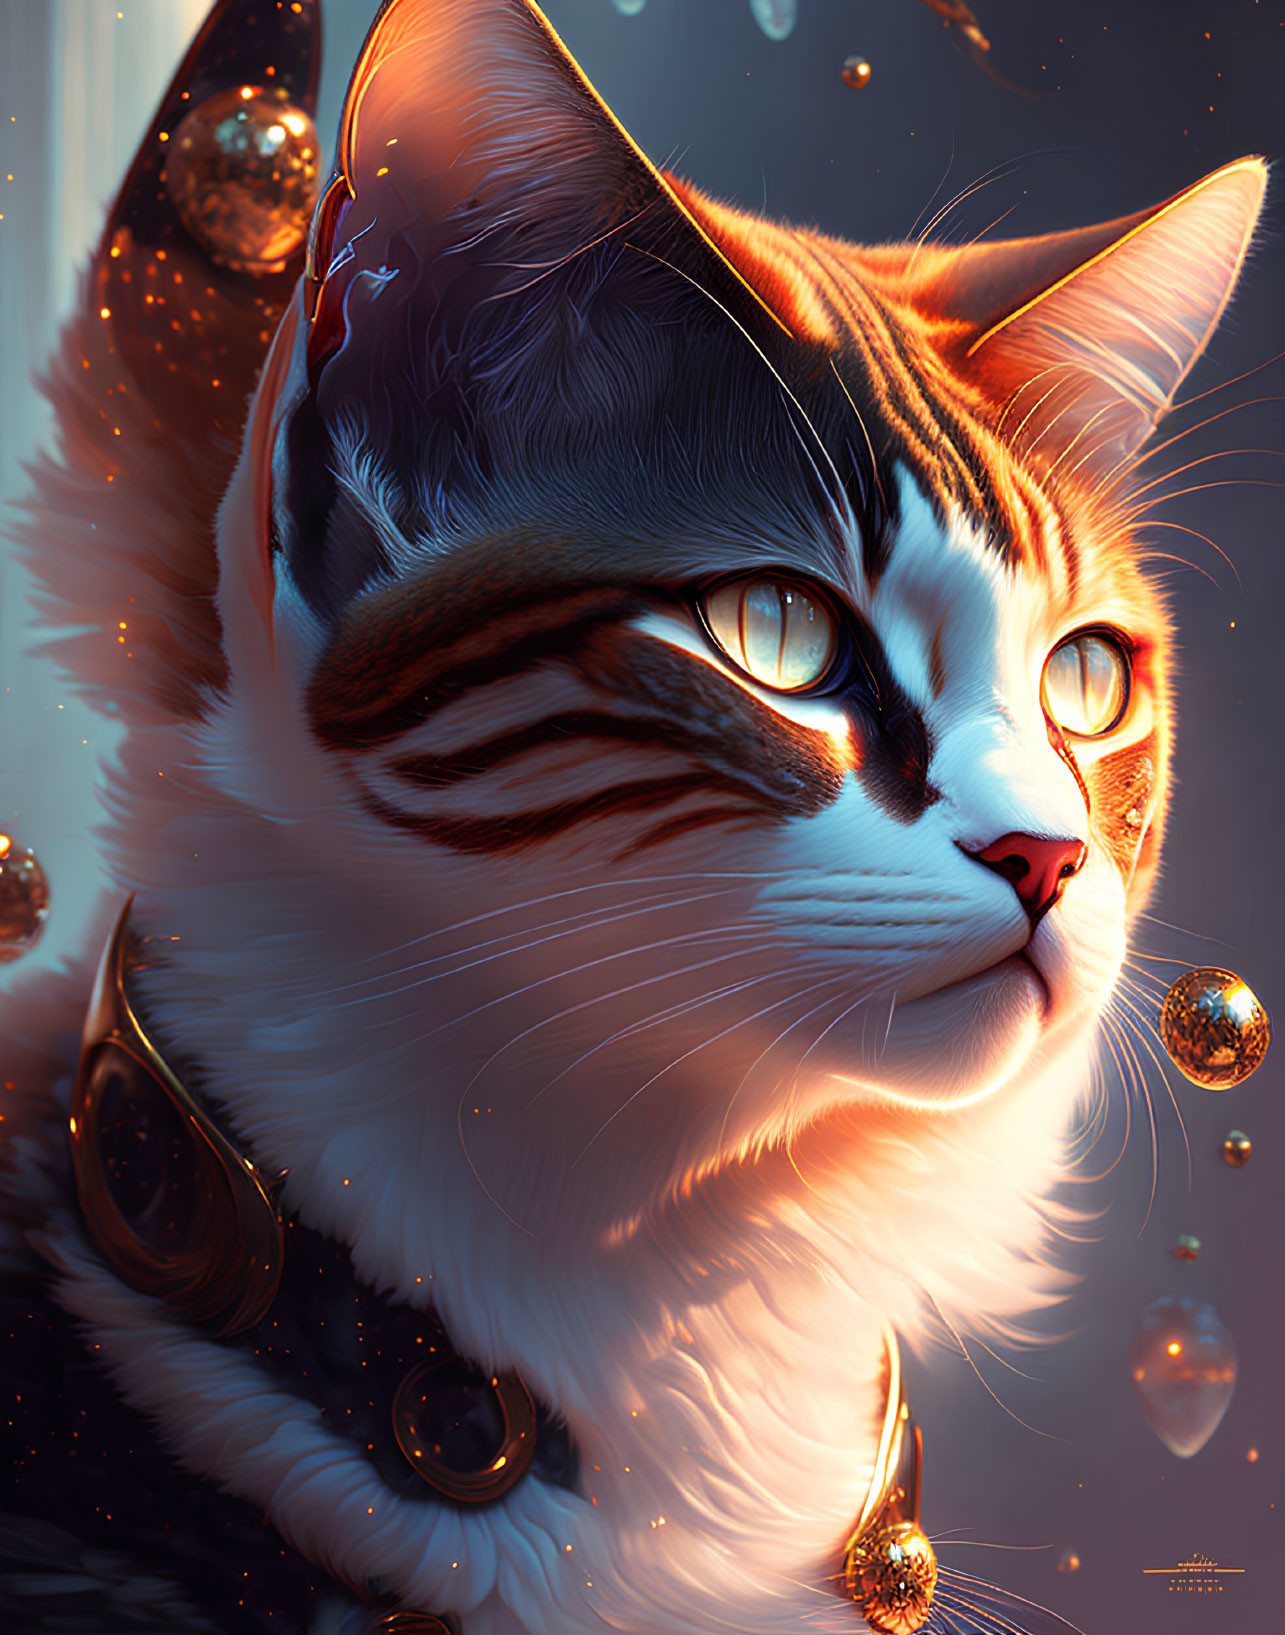 Stylized cat with glowing eyes in twilight sky with shimmering bubbles